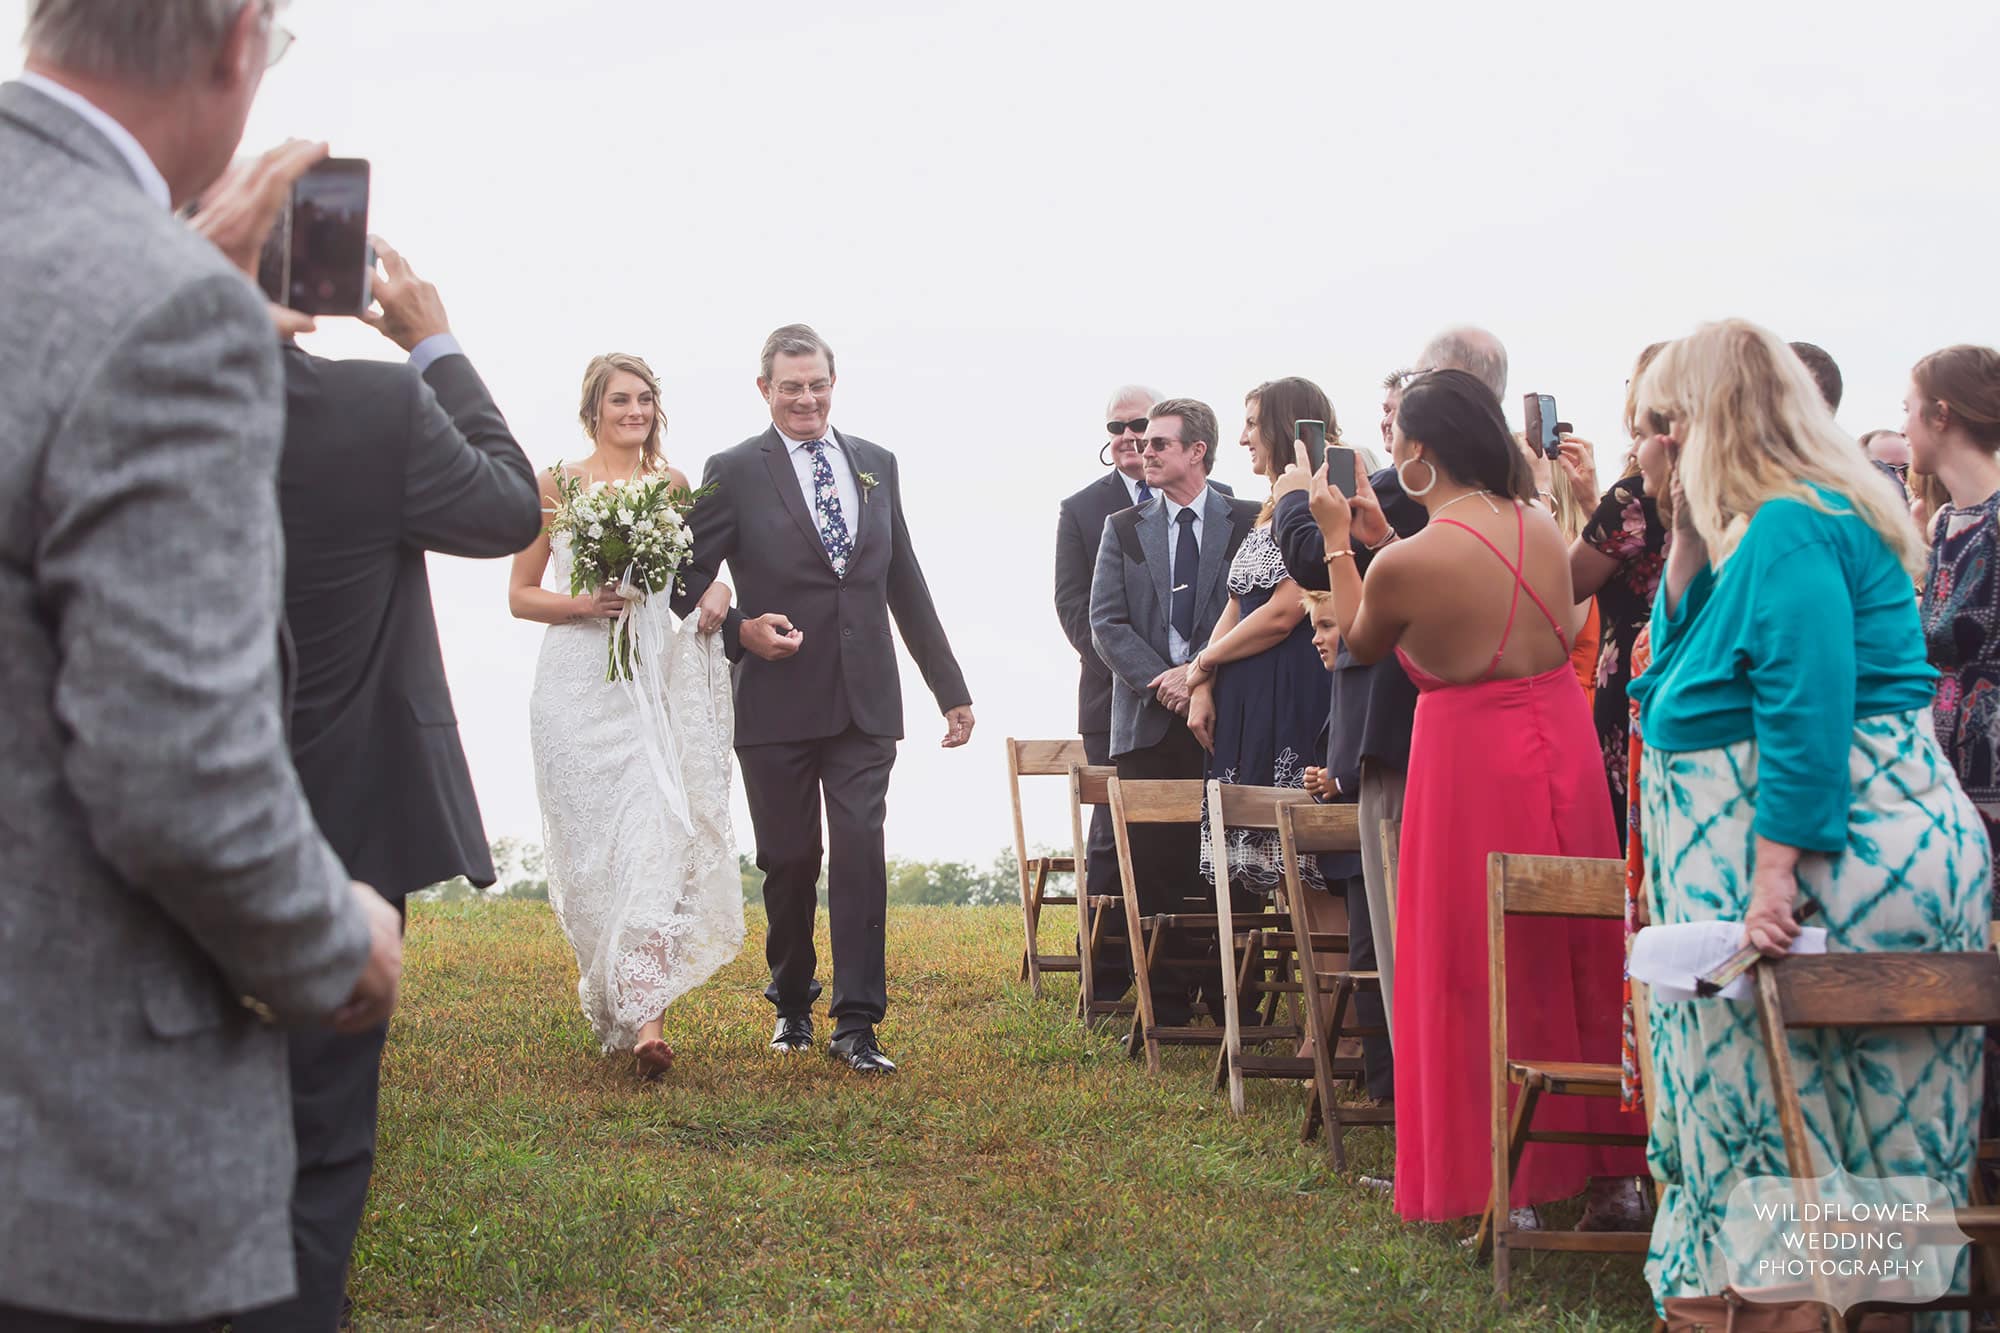 The bride and her father walk down the aisle at this outdoor Missouri barn wedding ceremony.